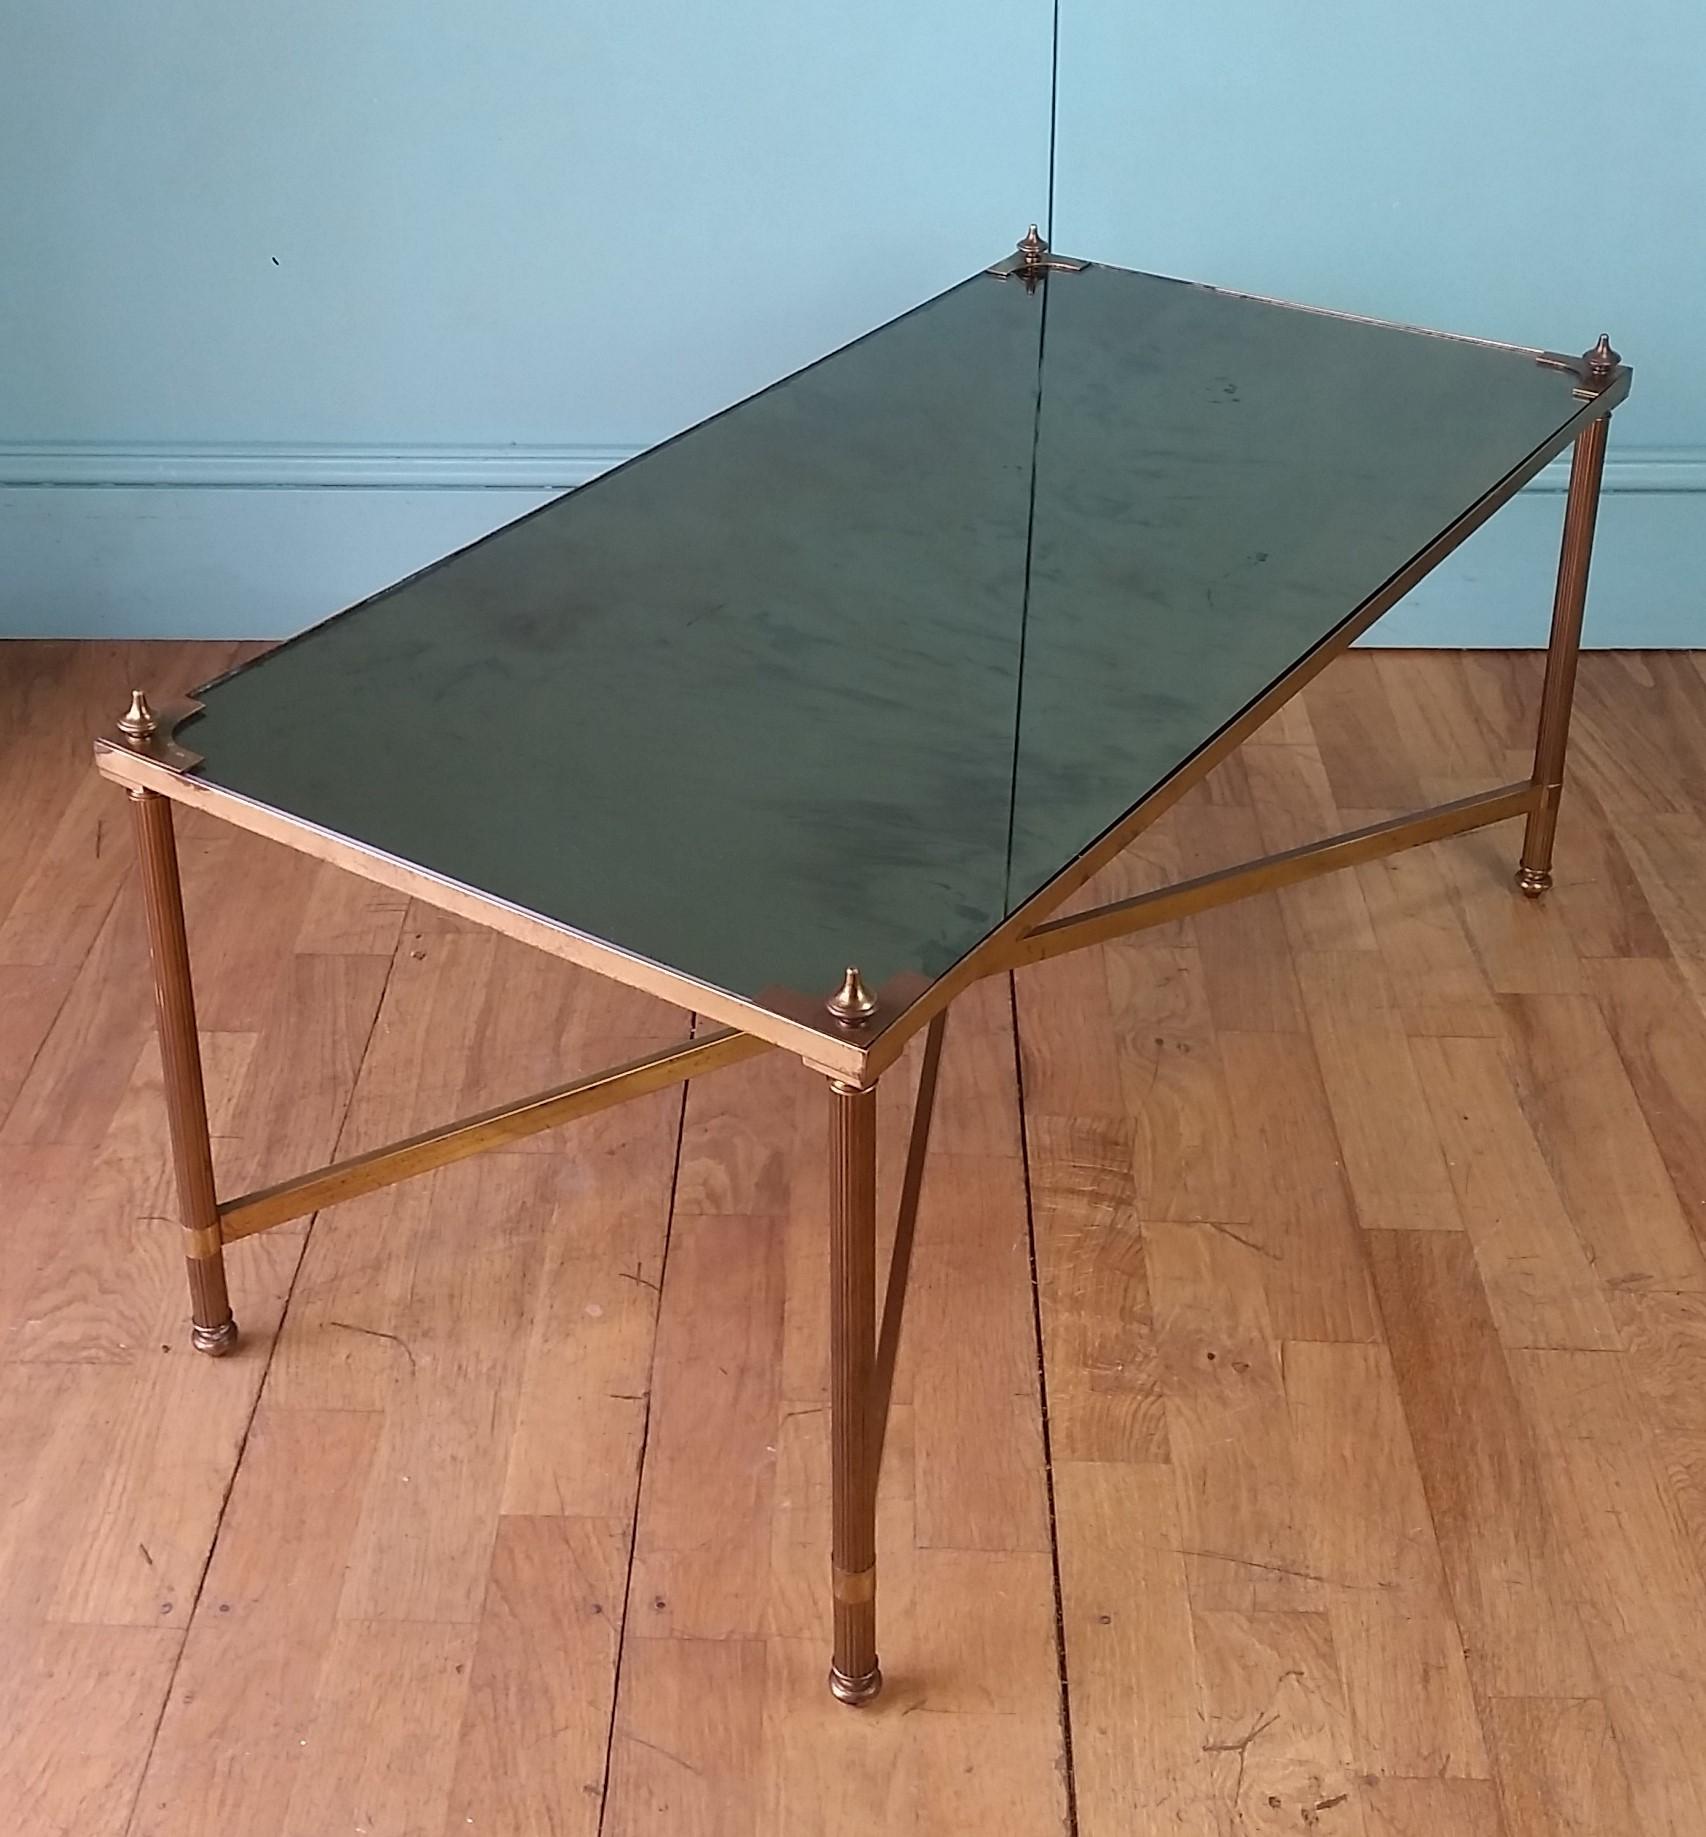 Mid century French coffee table by world famous Paris design house Maison Jansen.
Beautiful timeless design in authentic vintage condition with original bronzed etoile mirrored glass top.
The brass has taken on that lovely time worn patina and